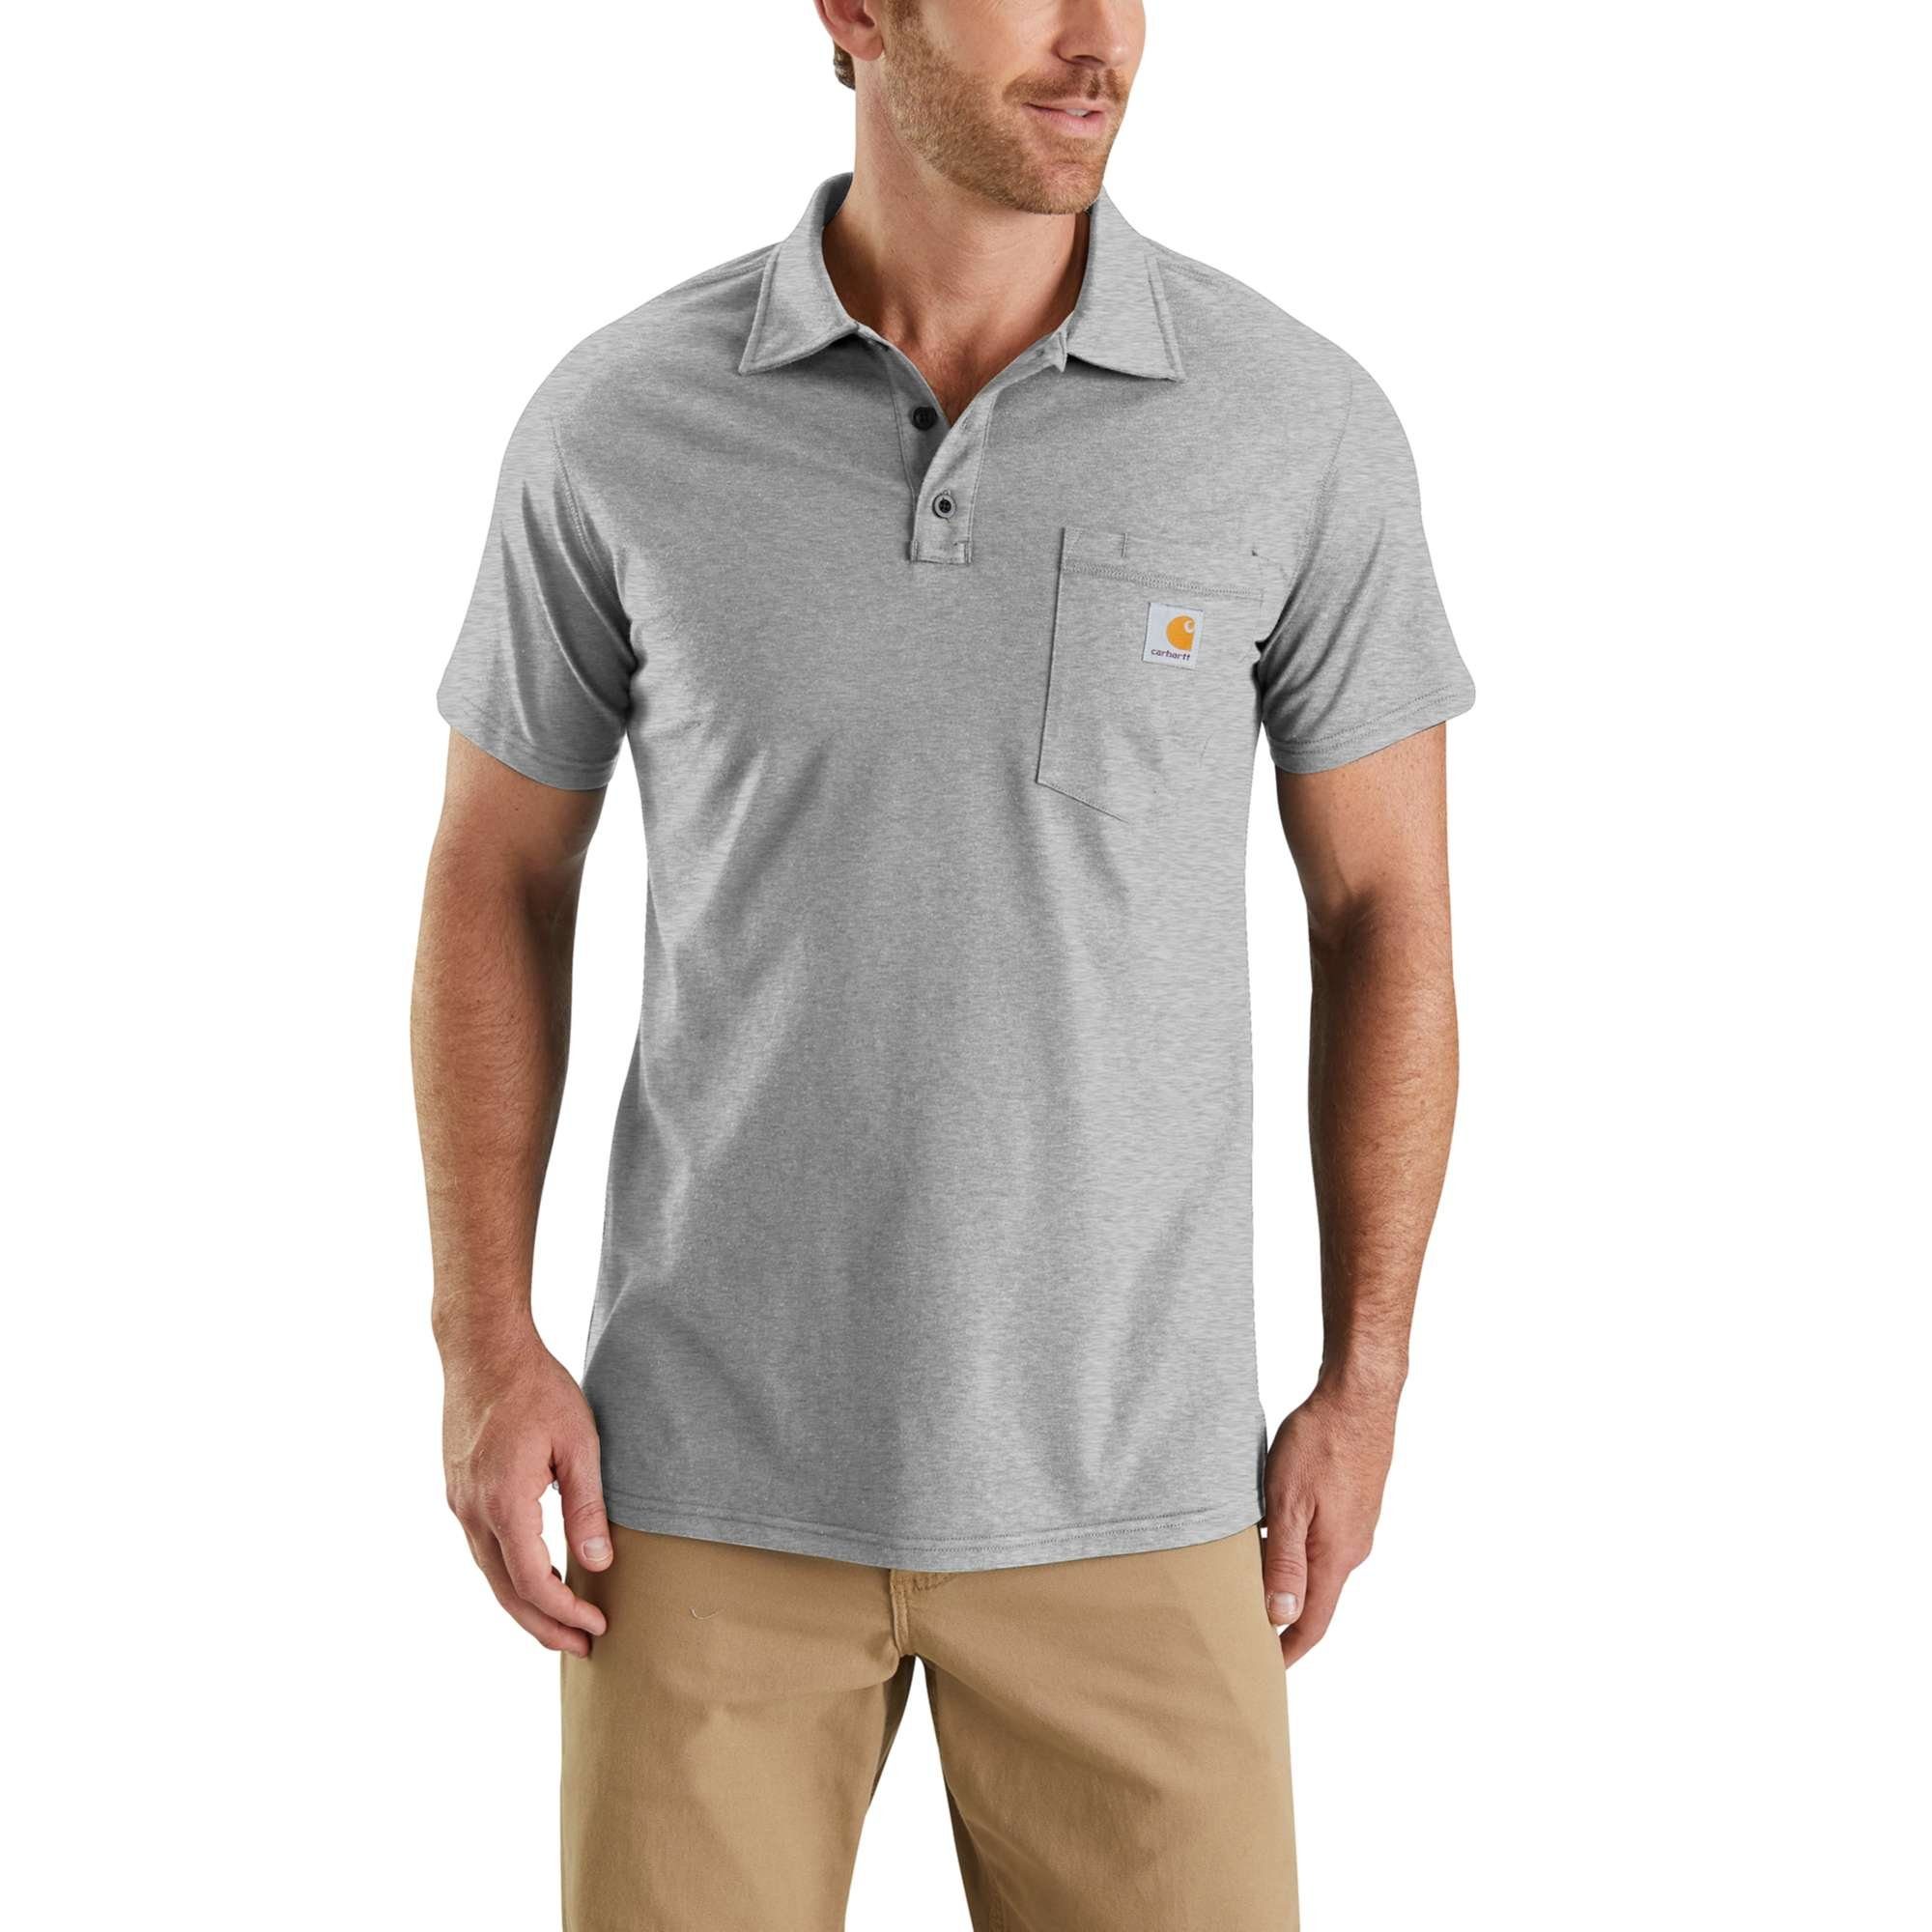 Force Relaxed Carhartt Fit Poloshirt grey heather